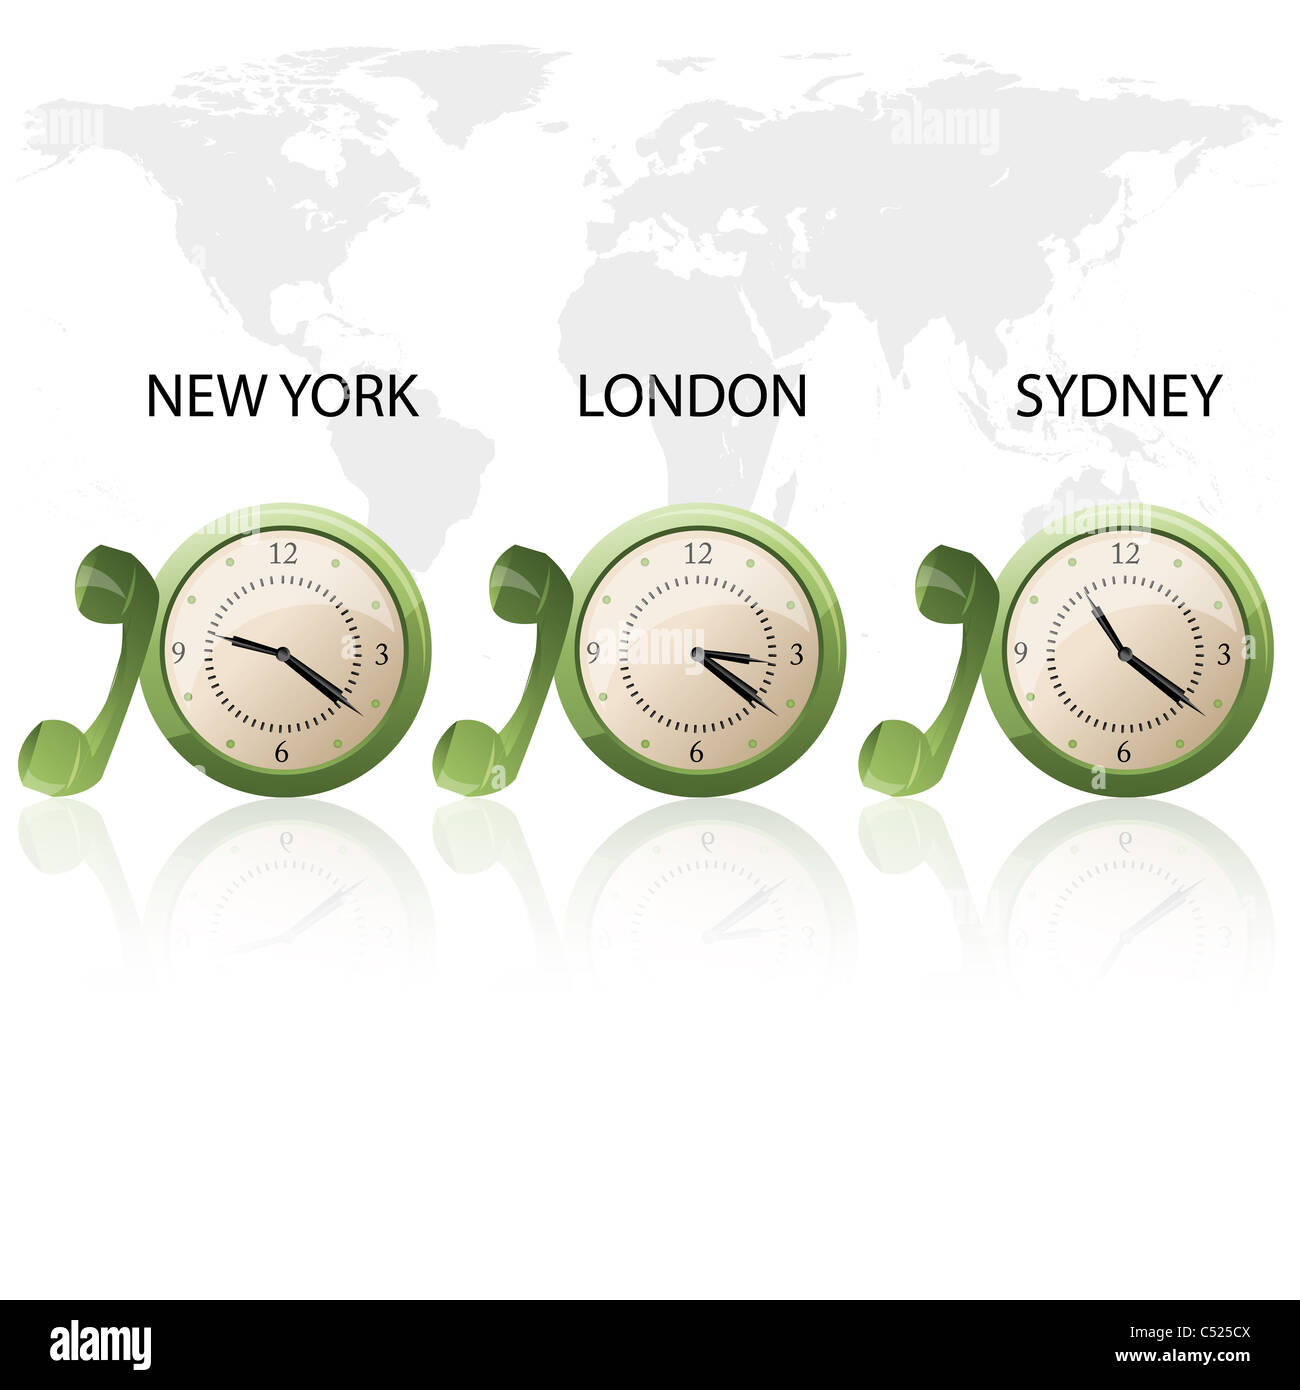 Картинка another time Zone. Часы MBO International. Картинка another time Zone смешные. Highest number of time Zones. Showed время